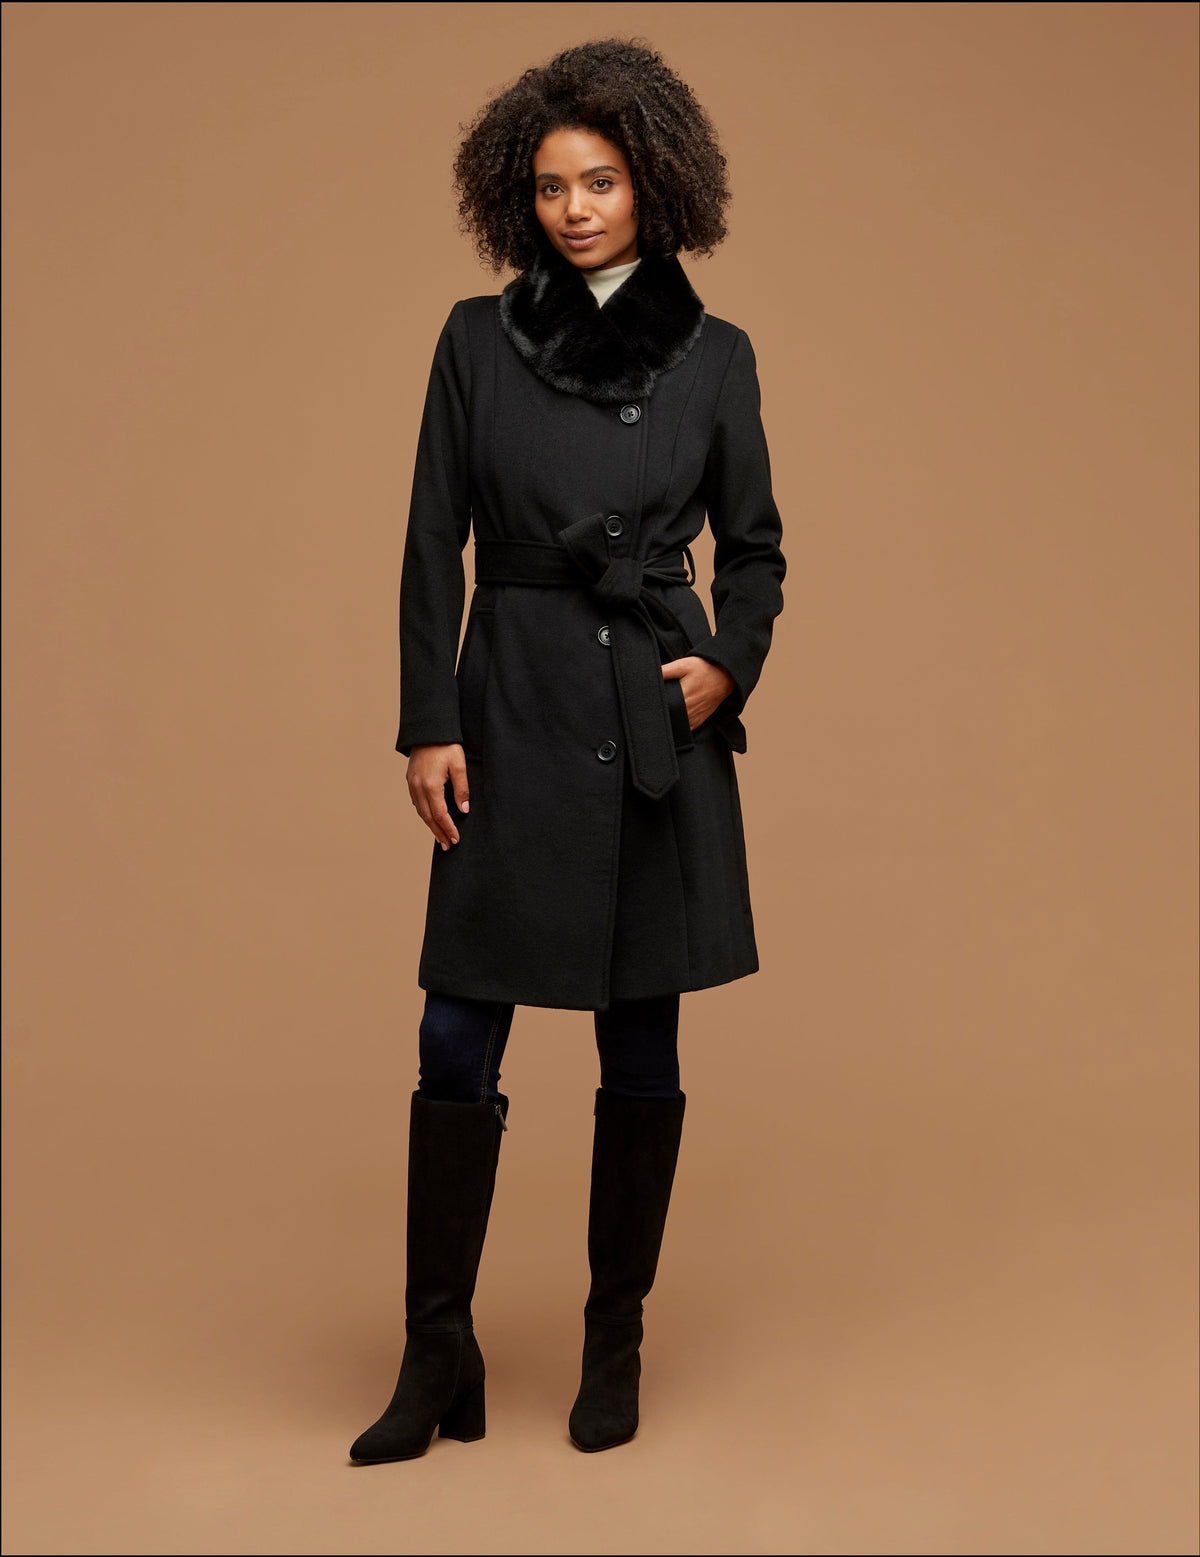 Anne Klein Black Belted Wrap Wool Coat With Fur Collar